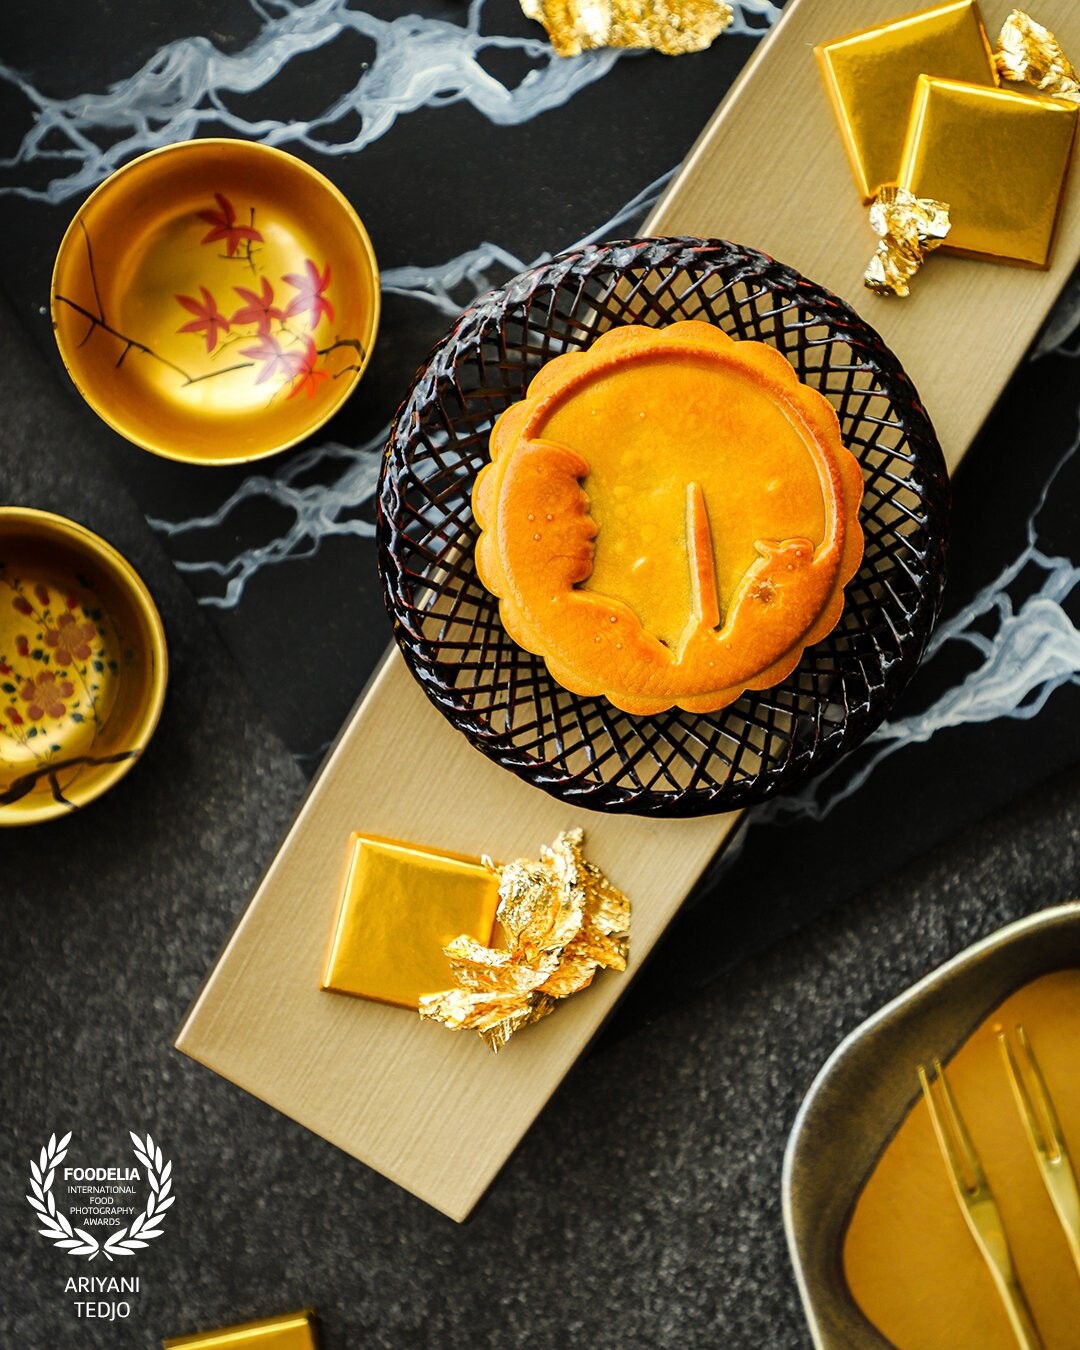 Matcha Lotus, Black Sesame and Valrhona Chocolate Mooncake. A special mooncake for Mid-Autumn Festival celebration this year, created by Chef Hideki Maeda of Nobu Singapore at Four Seasons Hotel Singapore. As this particular delicacy is incorporating Japanese culture into a traditional Chinese, the props used are a reflection of both cultures. The golden color chosen for this scene was inspired by the luxurious lacquered gift box that came with the mooncakes.